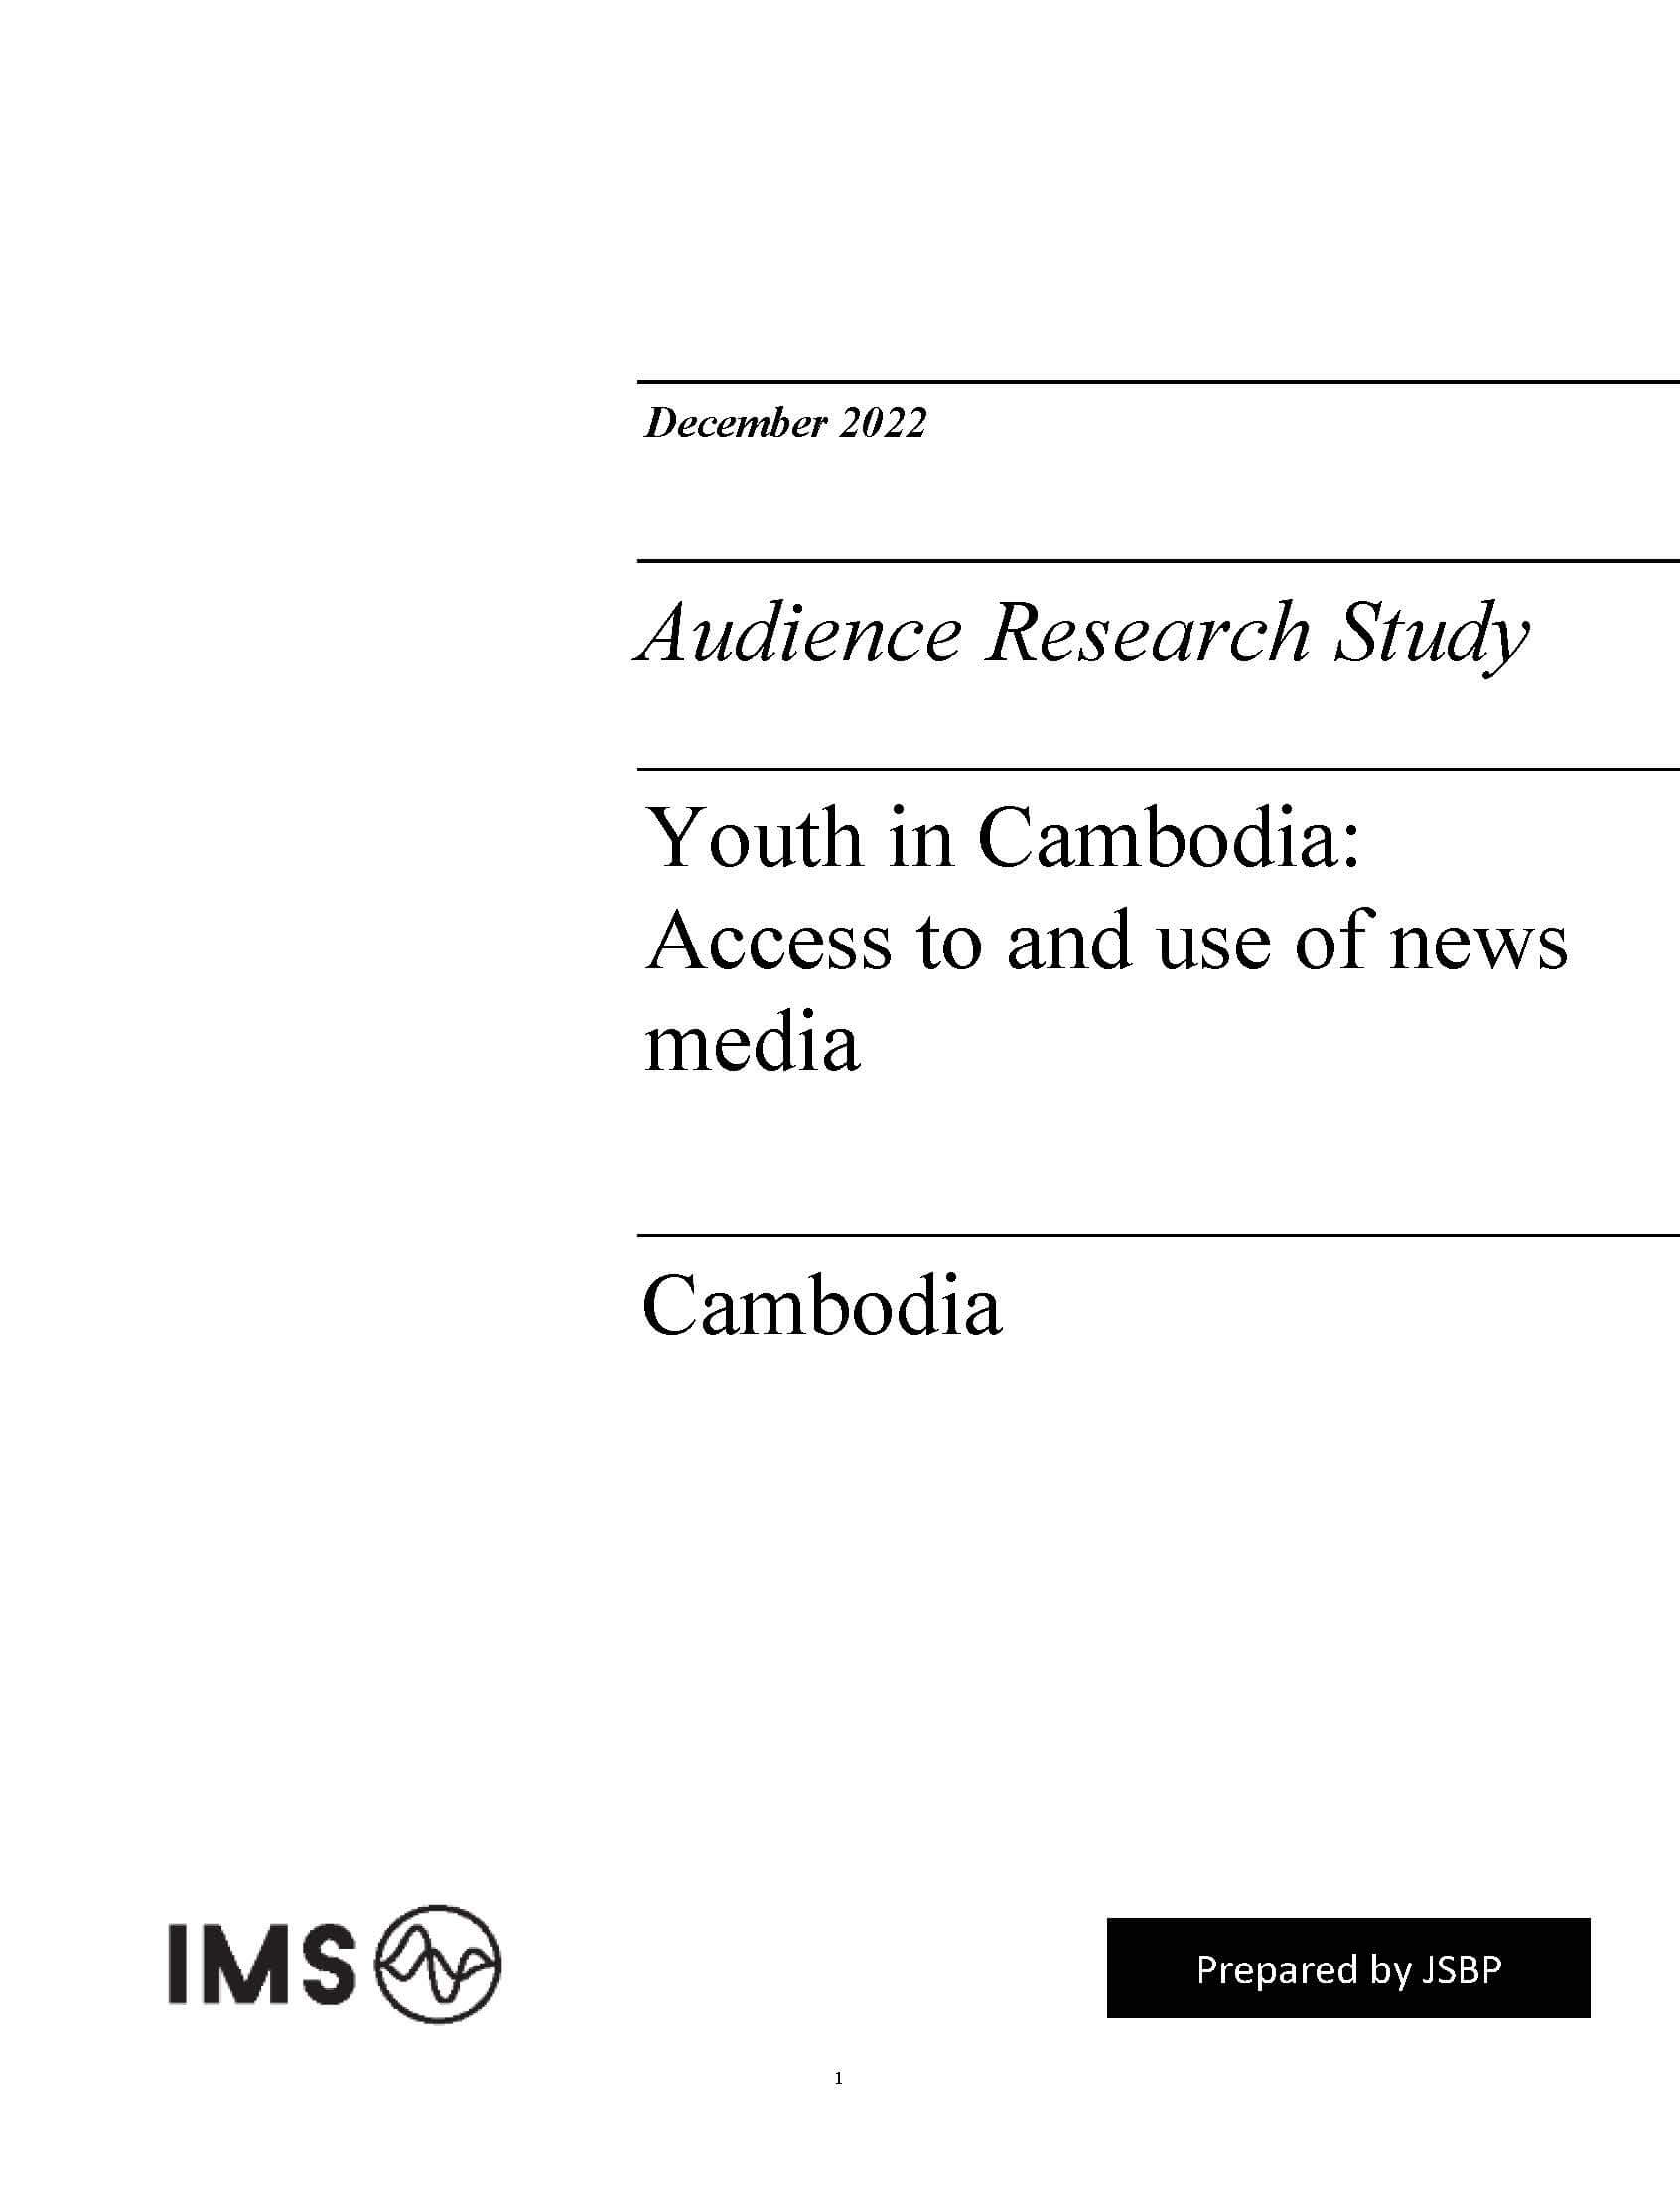 Youth in Cambodia: Access to and use of news media